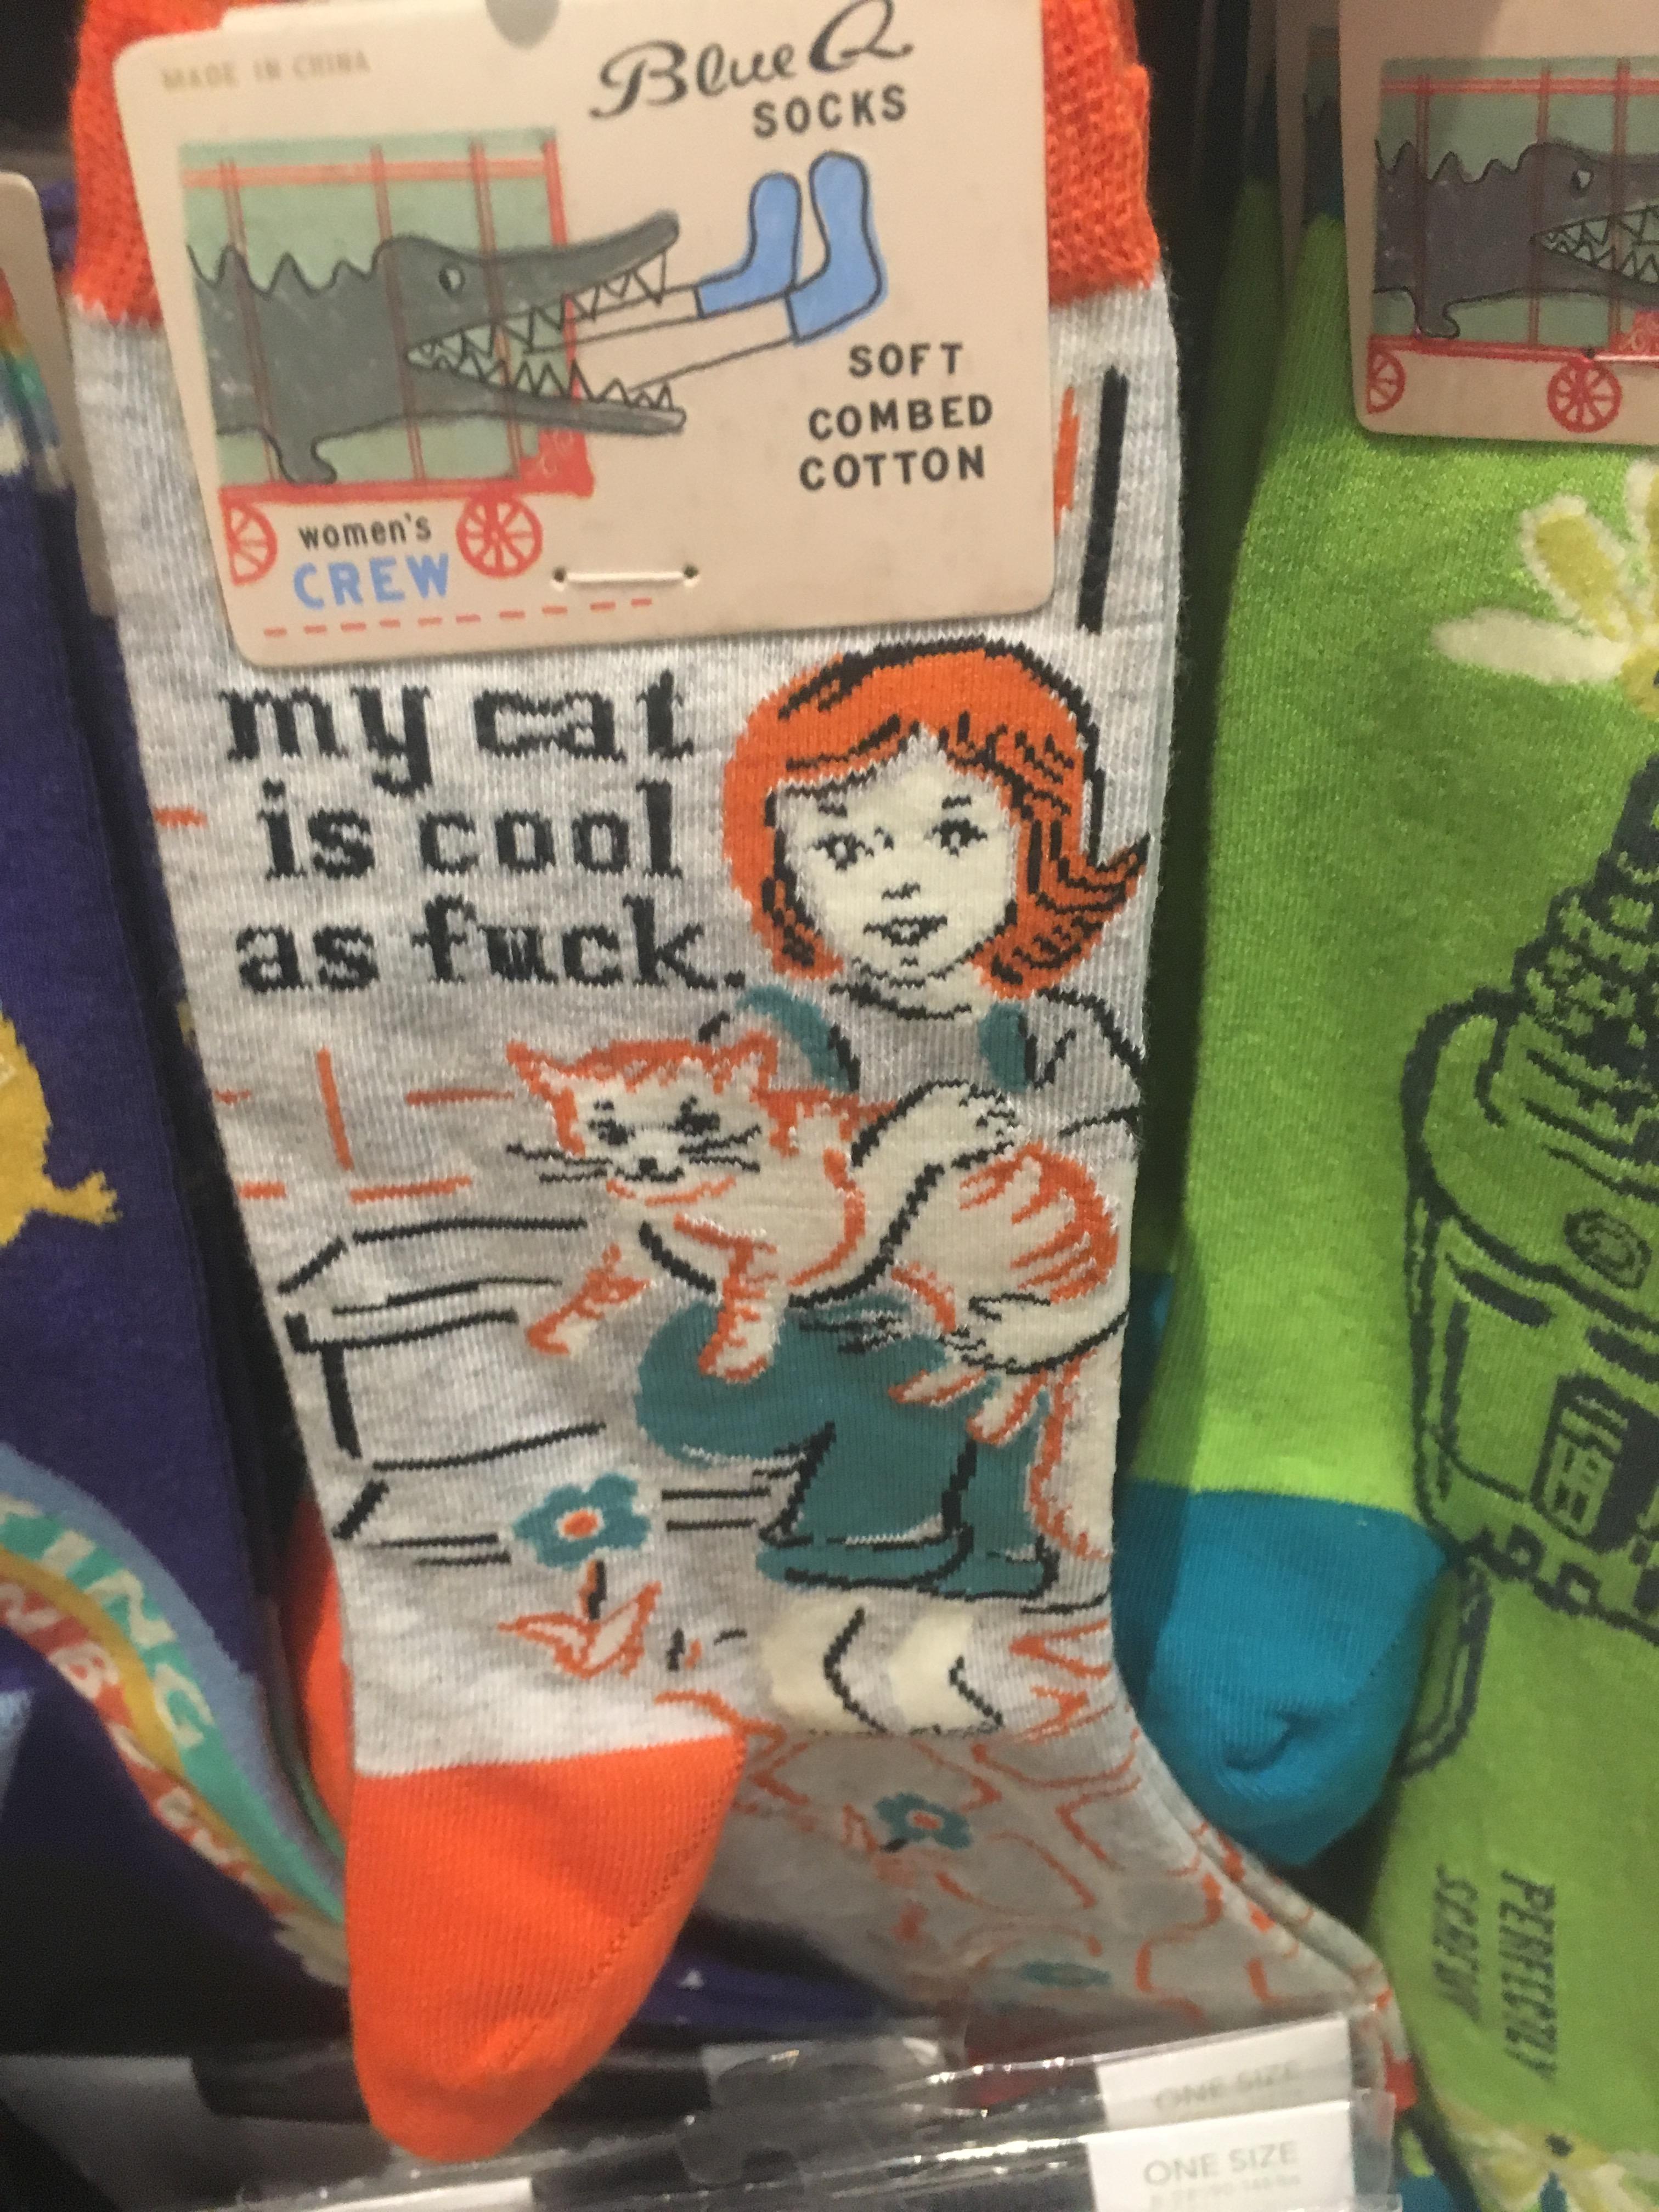 cool art - Blue 62 Socks Soft Combed Cotton women's Crew my cat is cool as fuck.